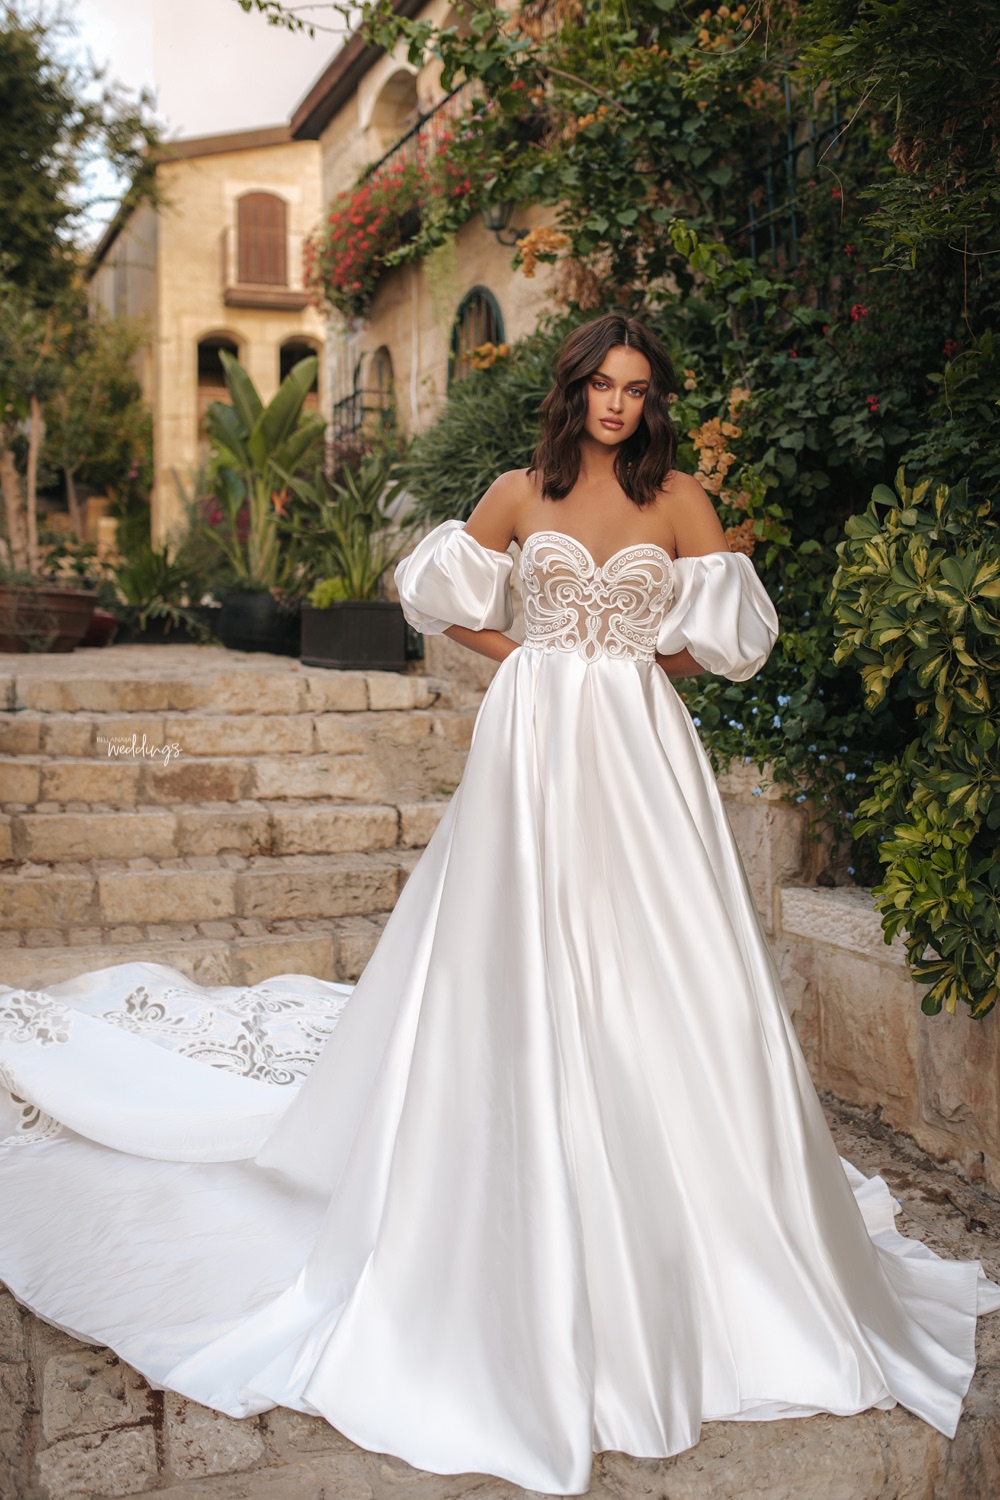 2022 Brides, We've Got Gowns That'll Make You The Talk Of The Town For Centuries 